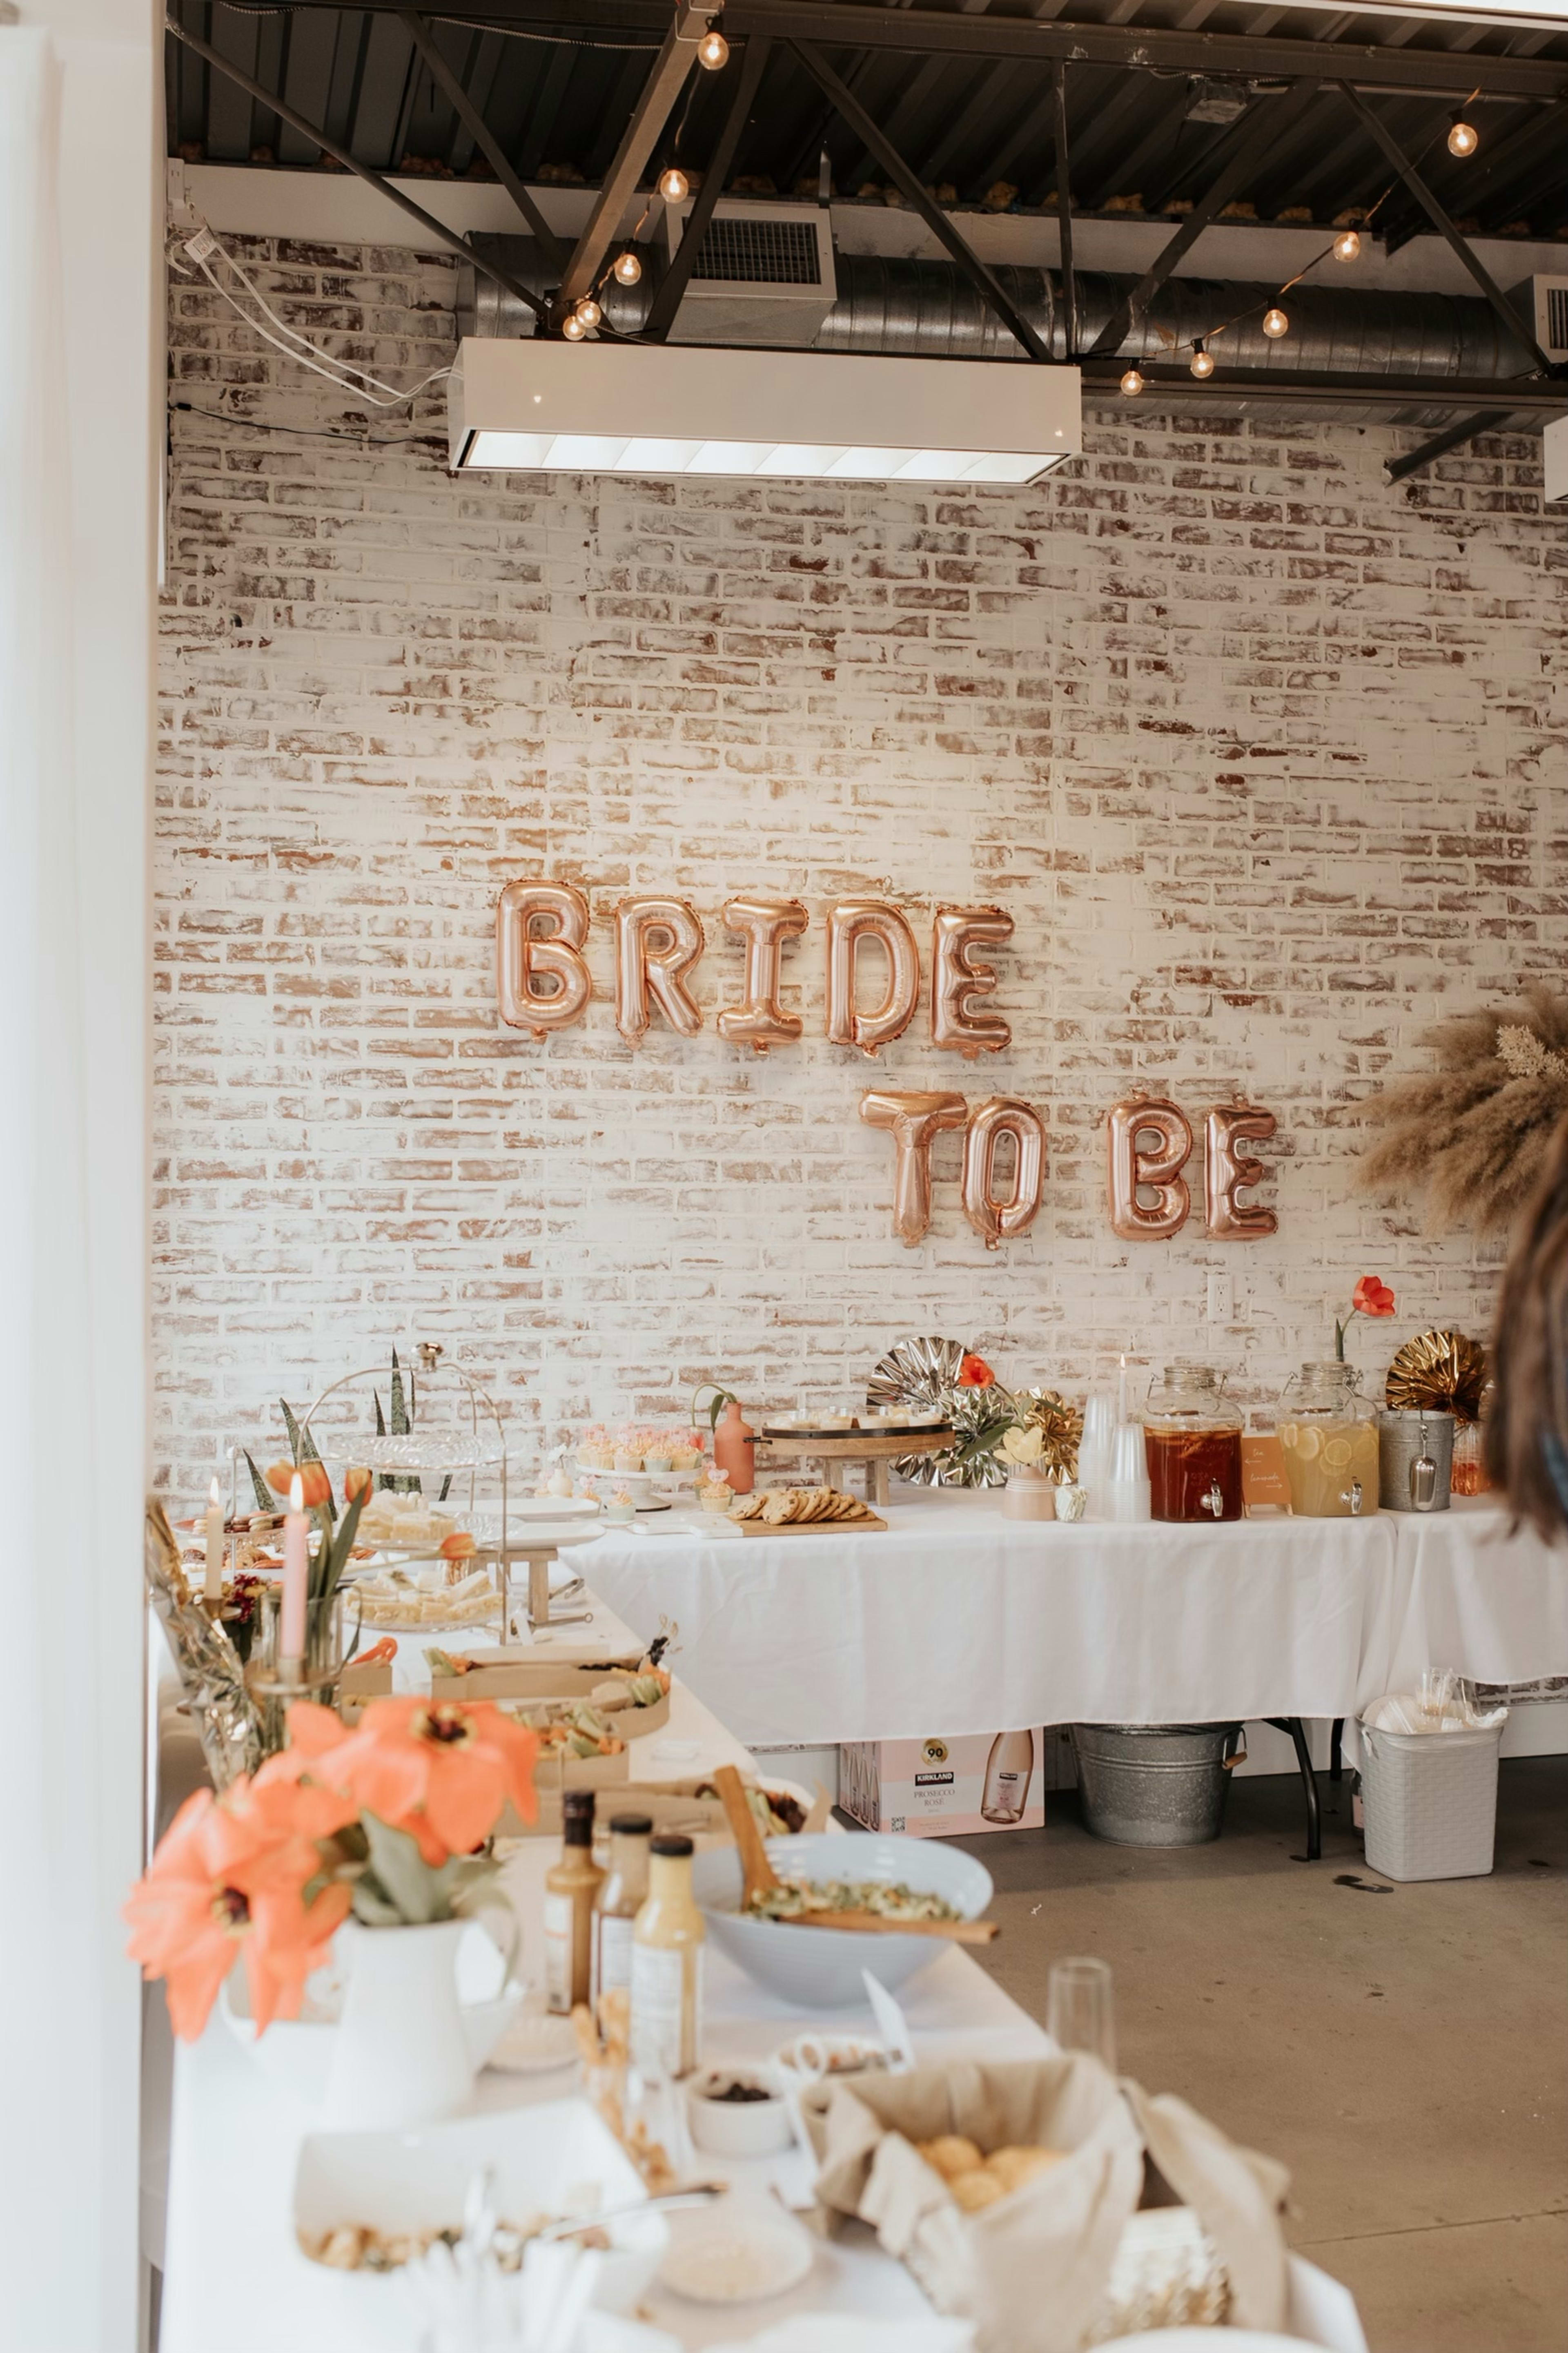 A rustic bride-to-be sign on a brick wall.